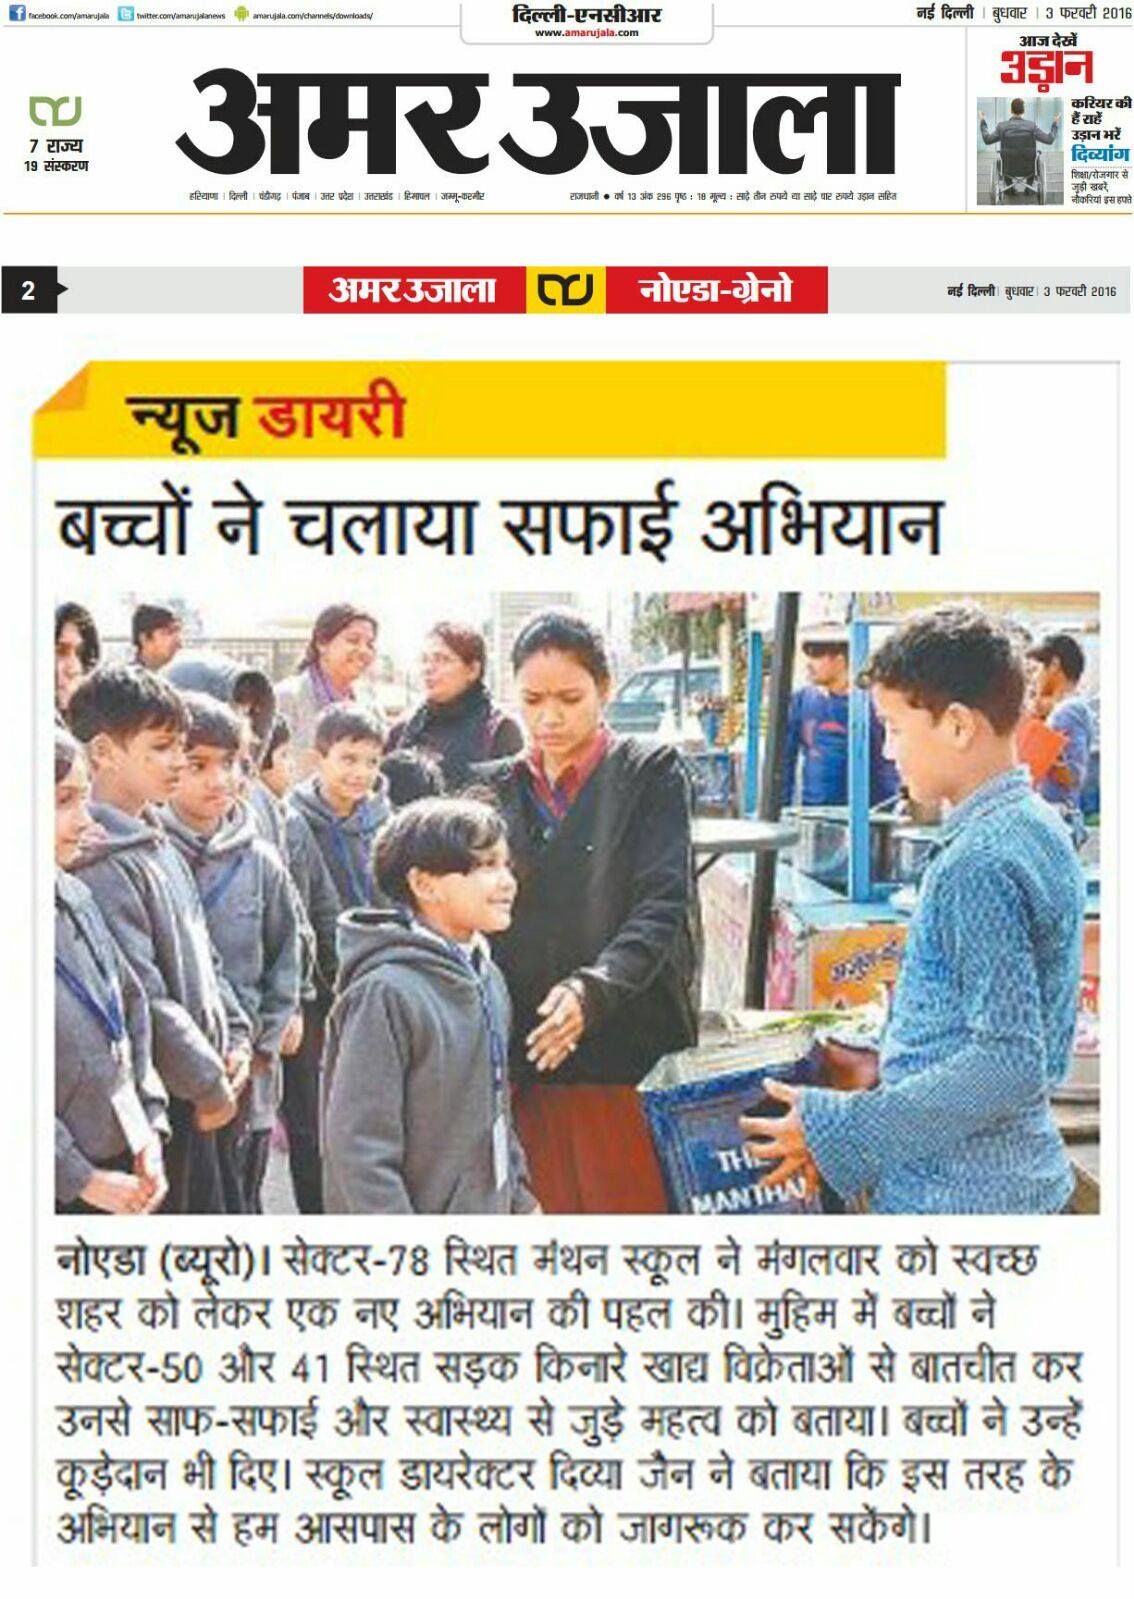 Amar Ujala Covered Clean City My Dream City initiated by The Manthan School